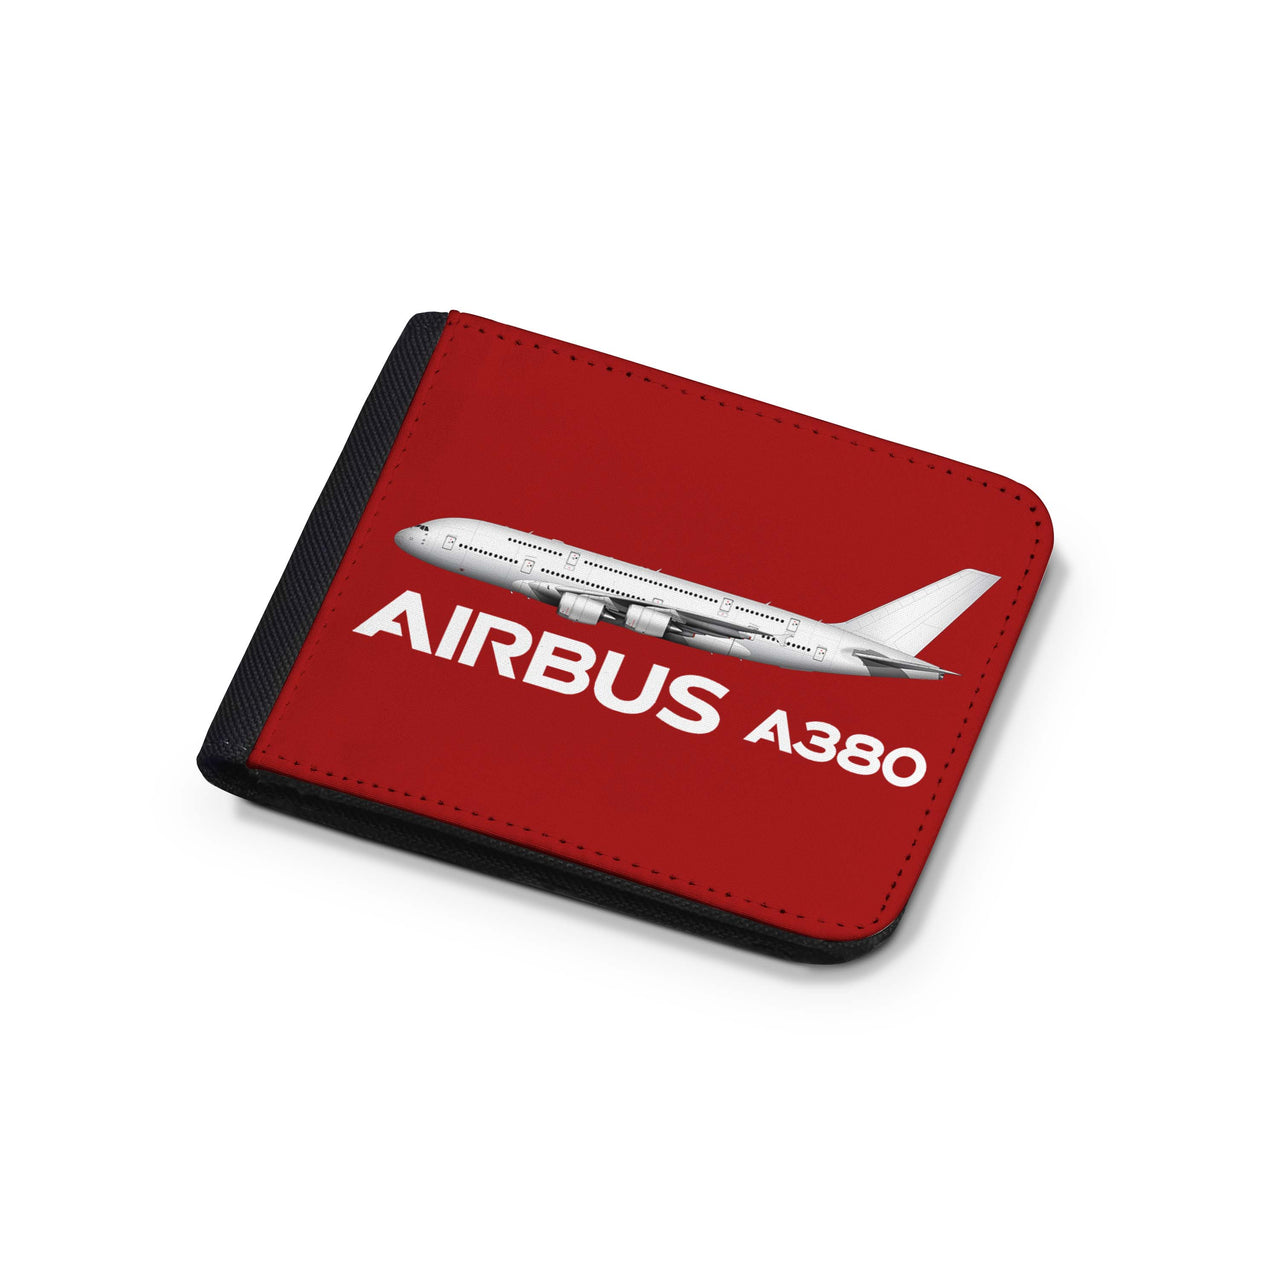 The Airbus A380 Designed Wallets